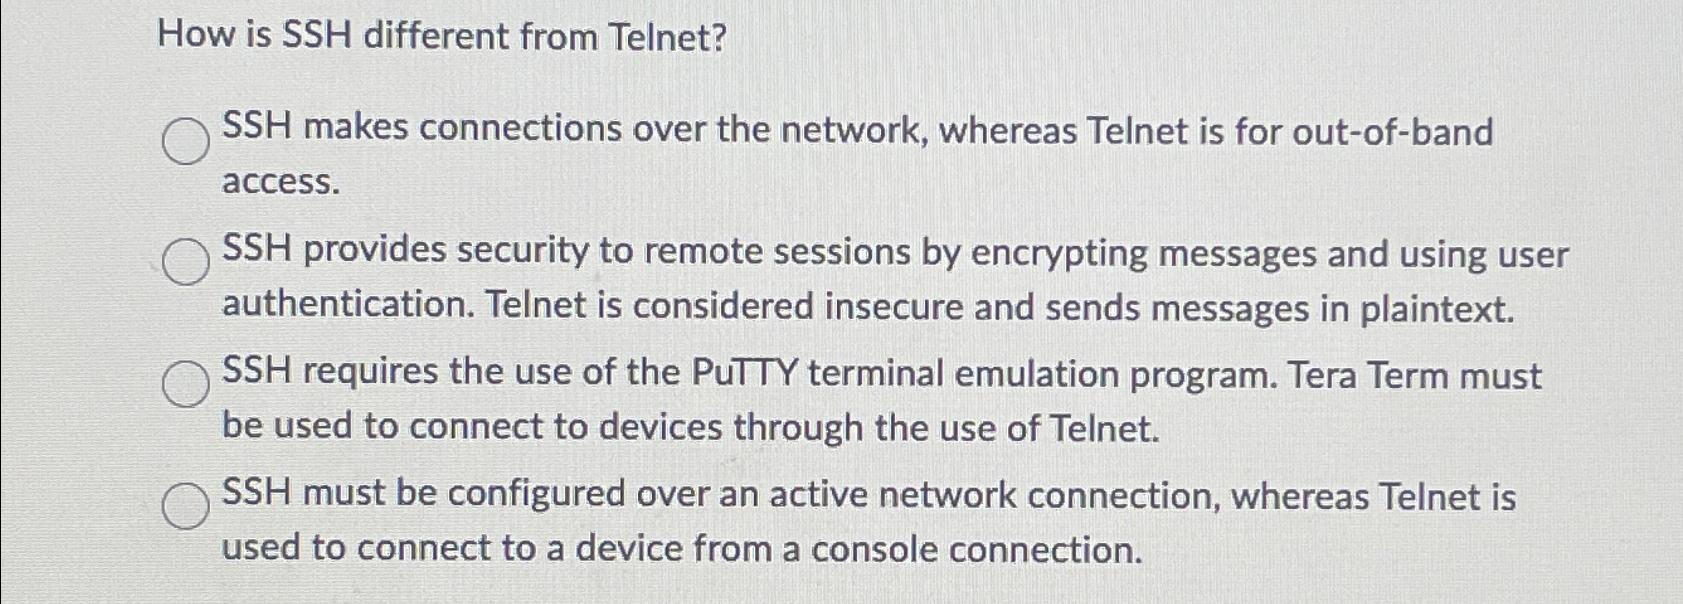 How is SSH different from Telnet? SSH makes connections over the network, whereas Telnet is for out-of-band